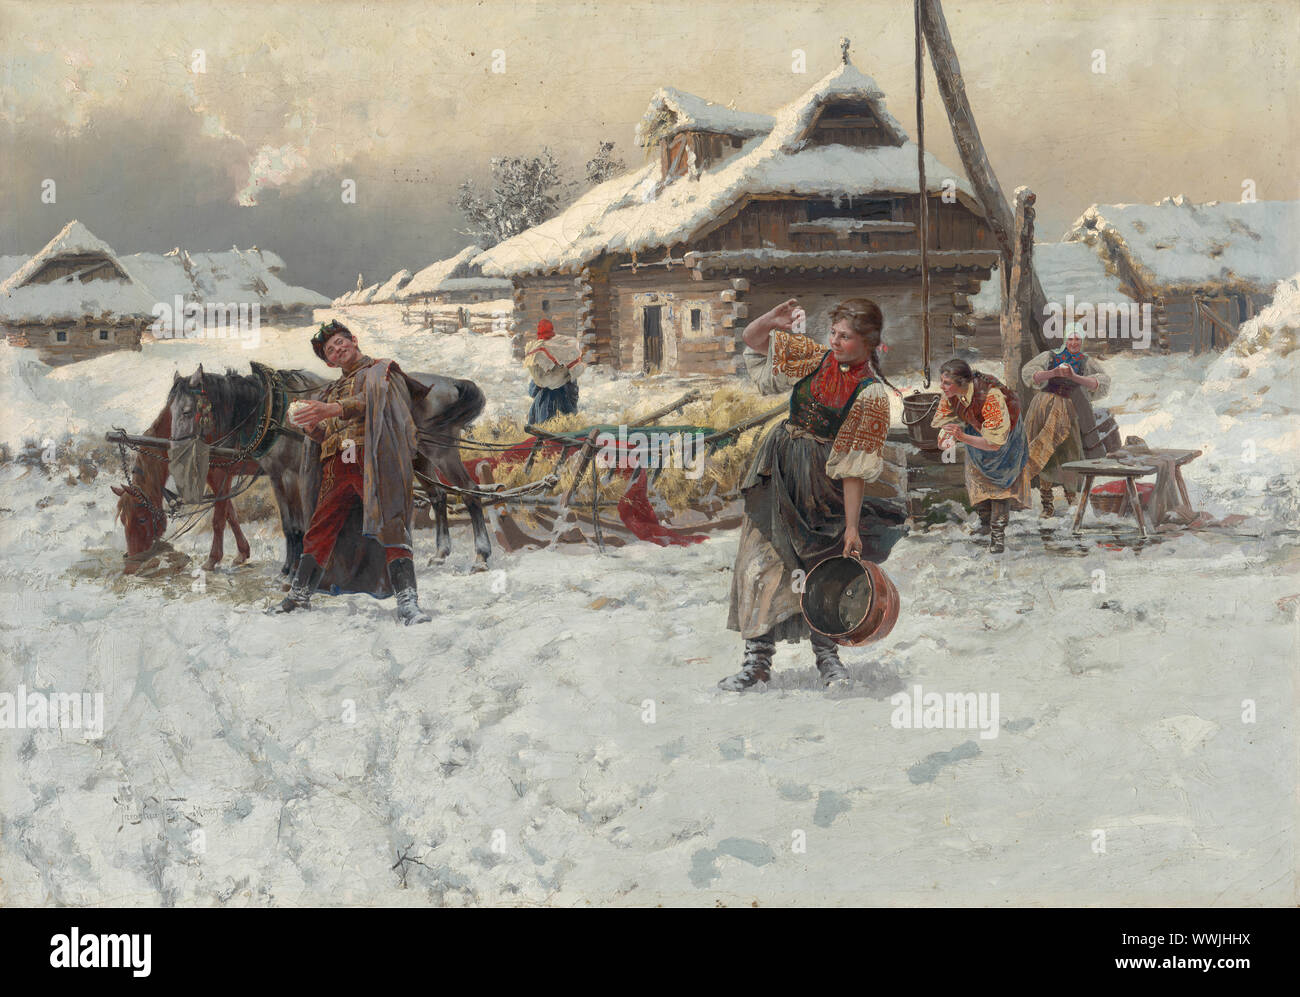 Throwing snowballs, 1892. Found in the Collection of Slovak National Gallery, Bratislava. Stock Photo